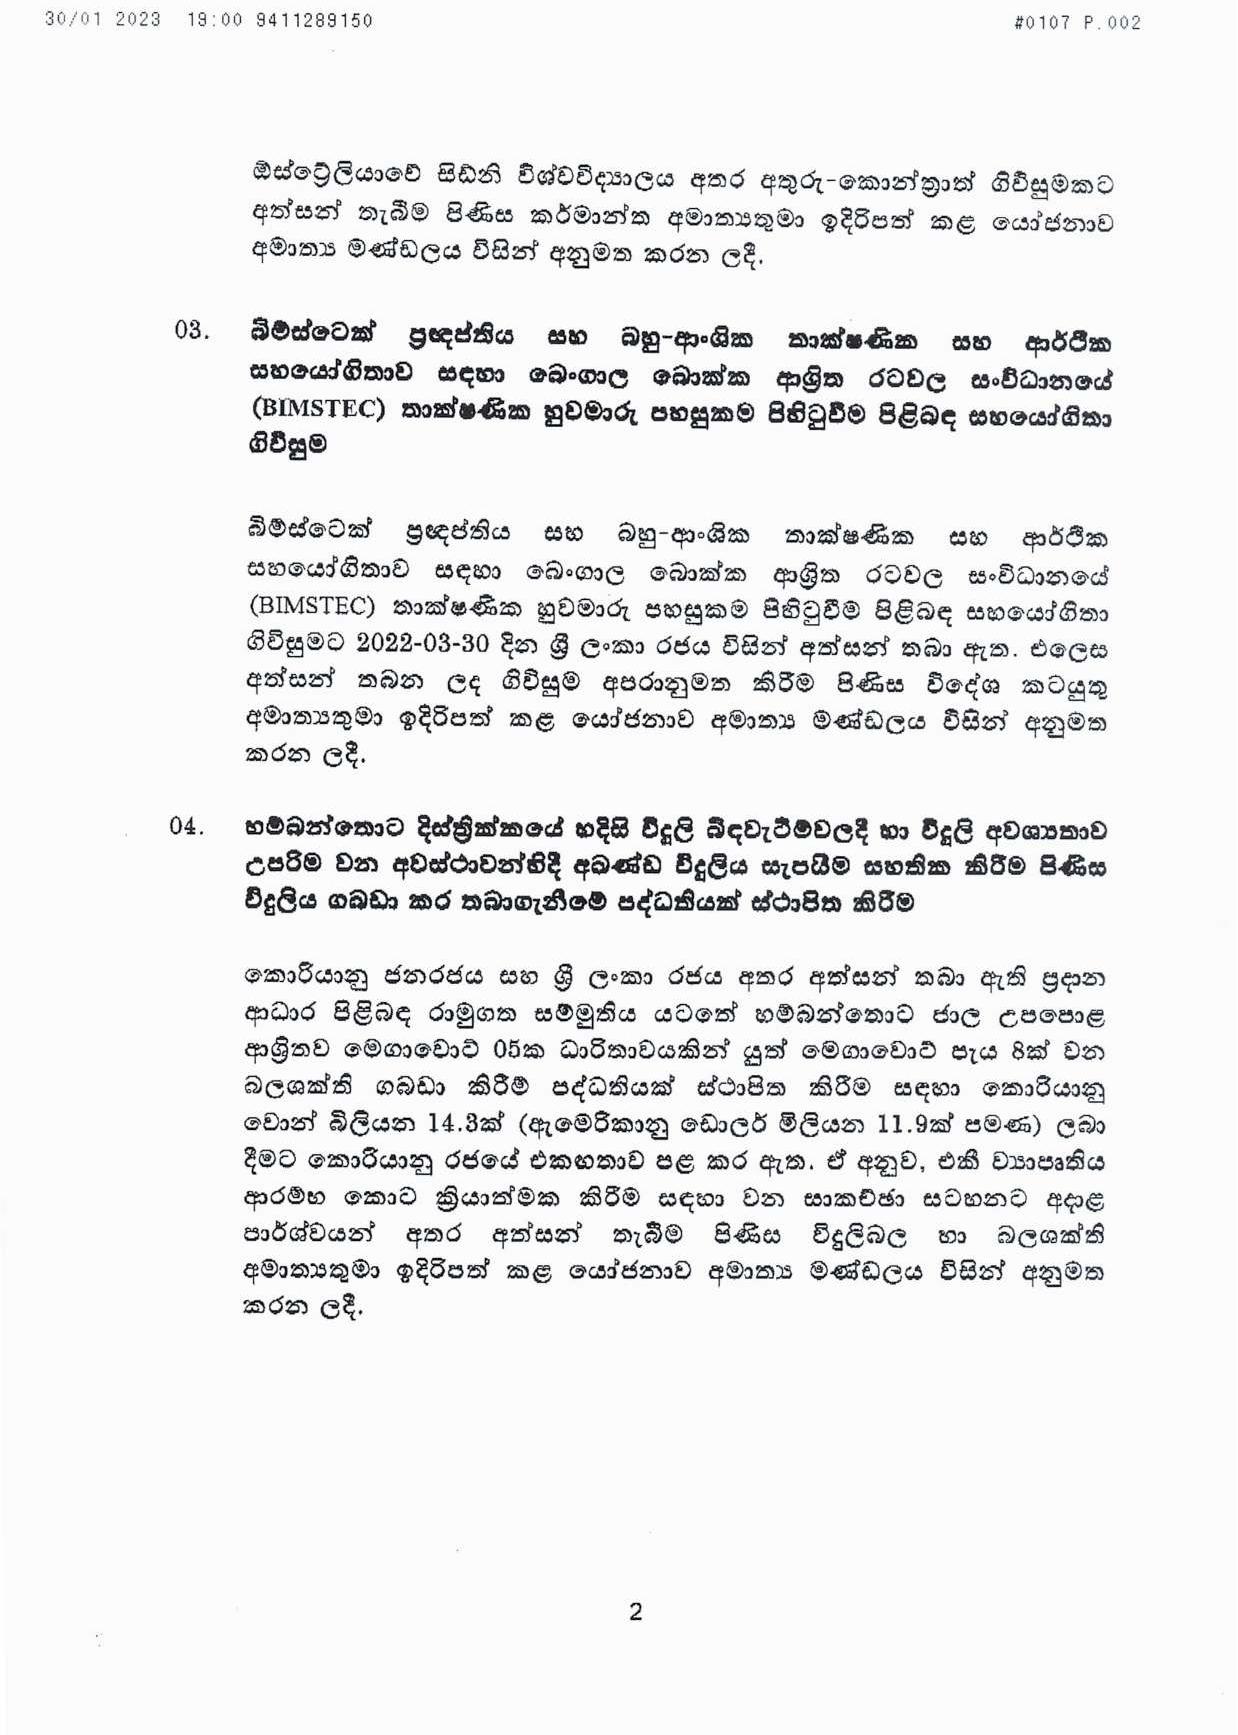 Cabinet Decisions on 30.01.2023 page 002